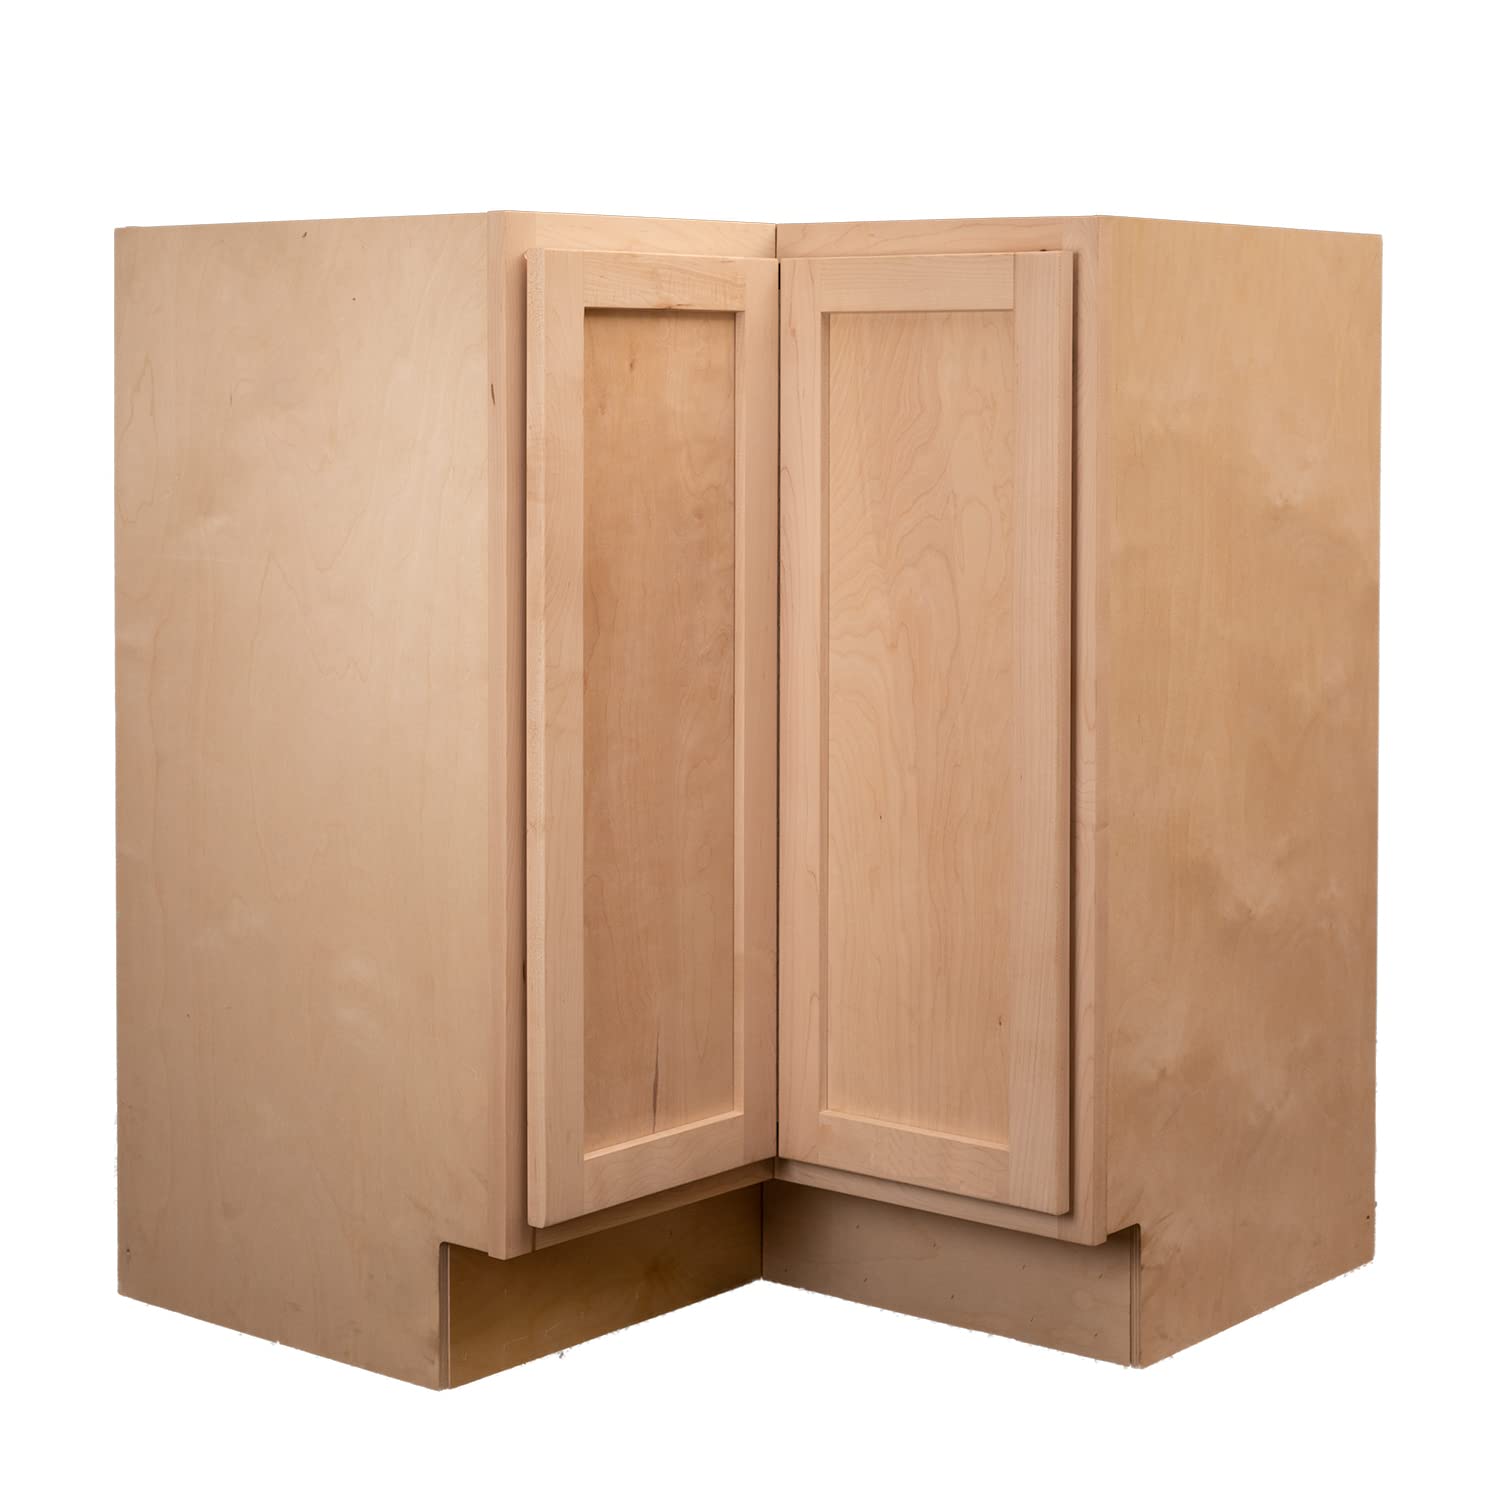 Quicklock RTA (Ready-to-Assemble) | Base Kitchen Cabinets - Shaker Style | Plywood Box Construction | Made in America (Raw Maple, 18" D x 30" W x 34.5" H Lazy Susan)